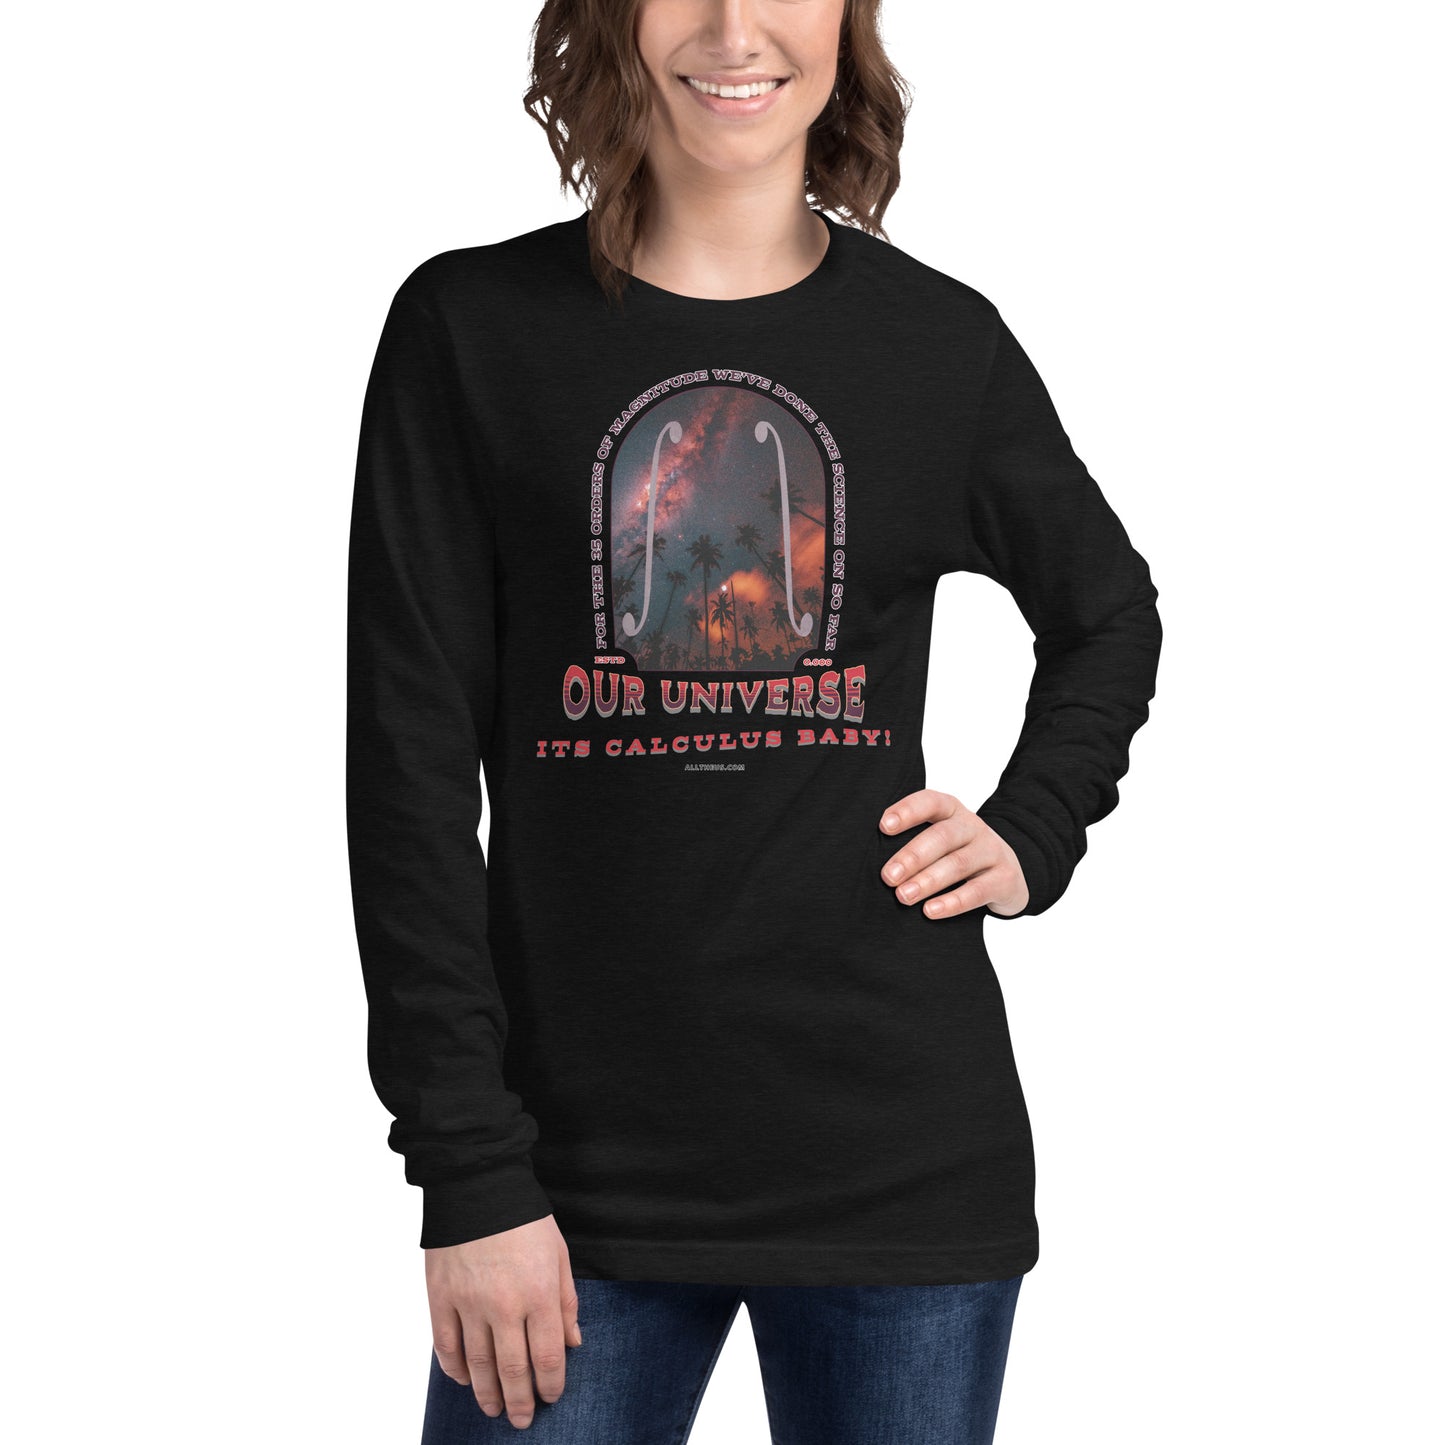 Unisex Long Sleeve Tee - Our Red Shifted Universe, Its Calculus Baby!